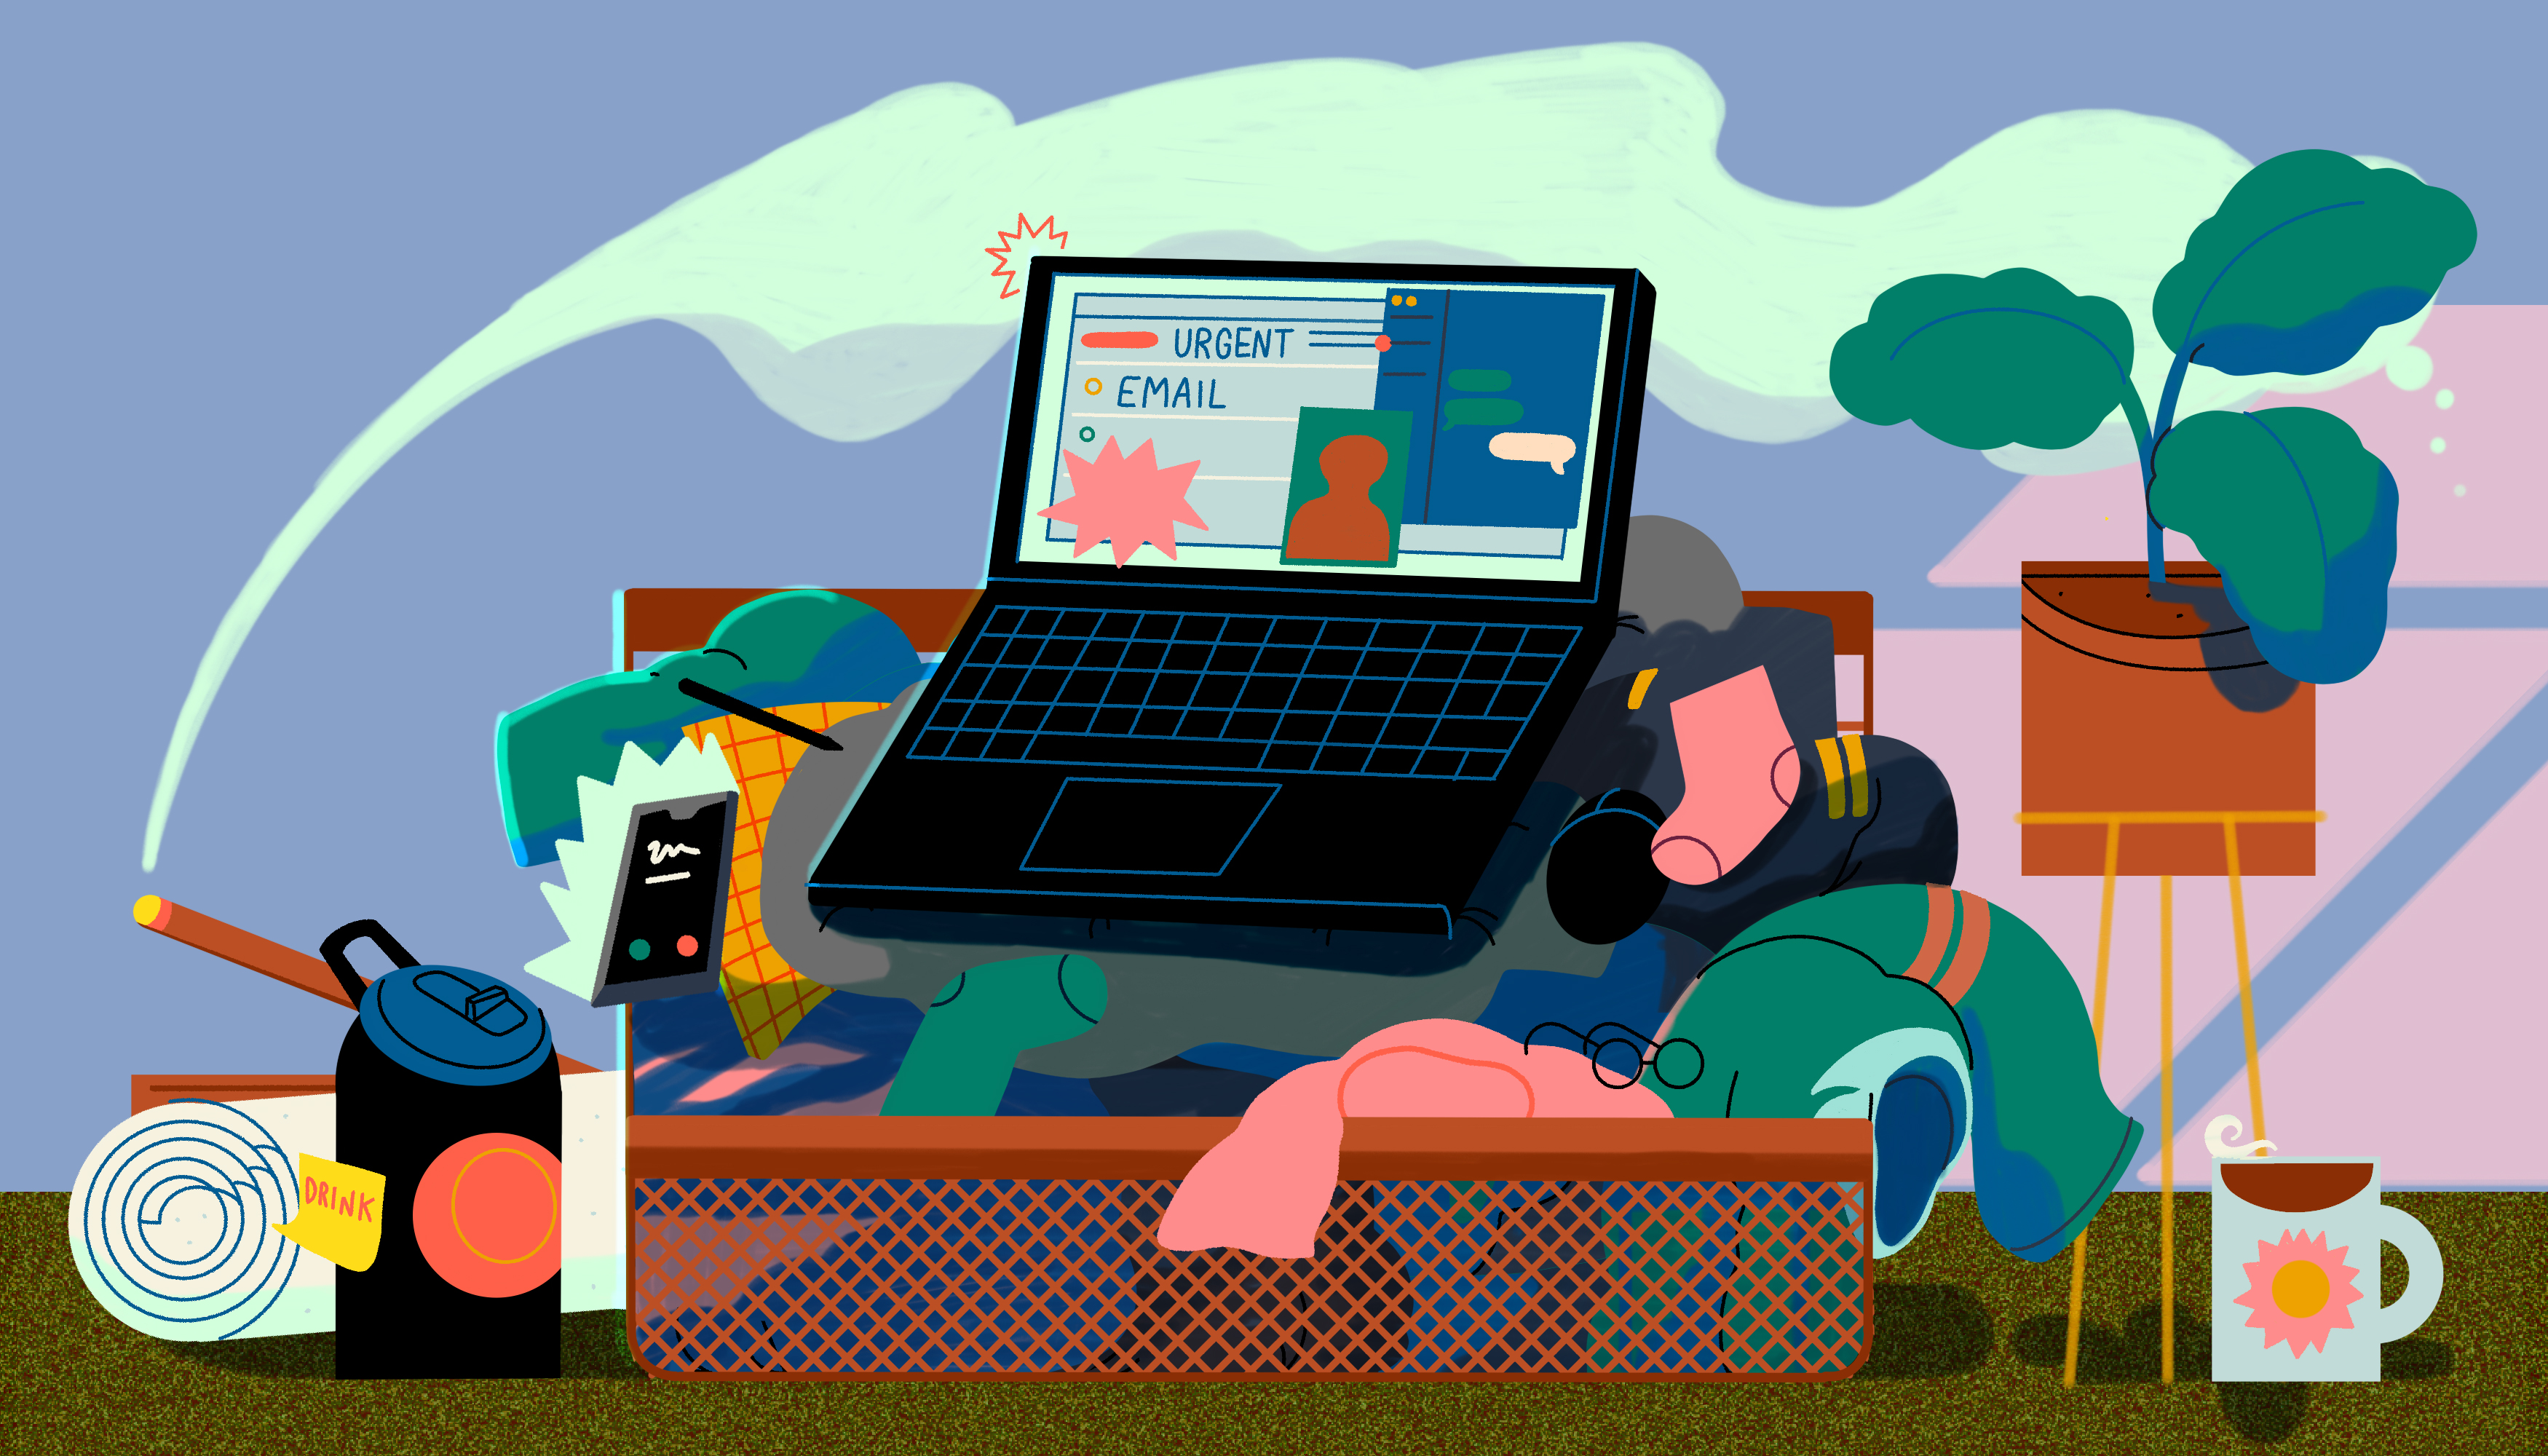 An open laptop flashing notifications sits on top of a pile of dirty laundry. Illustration.